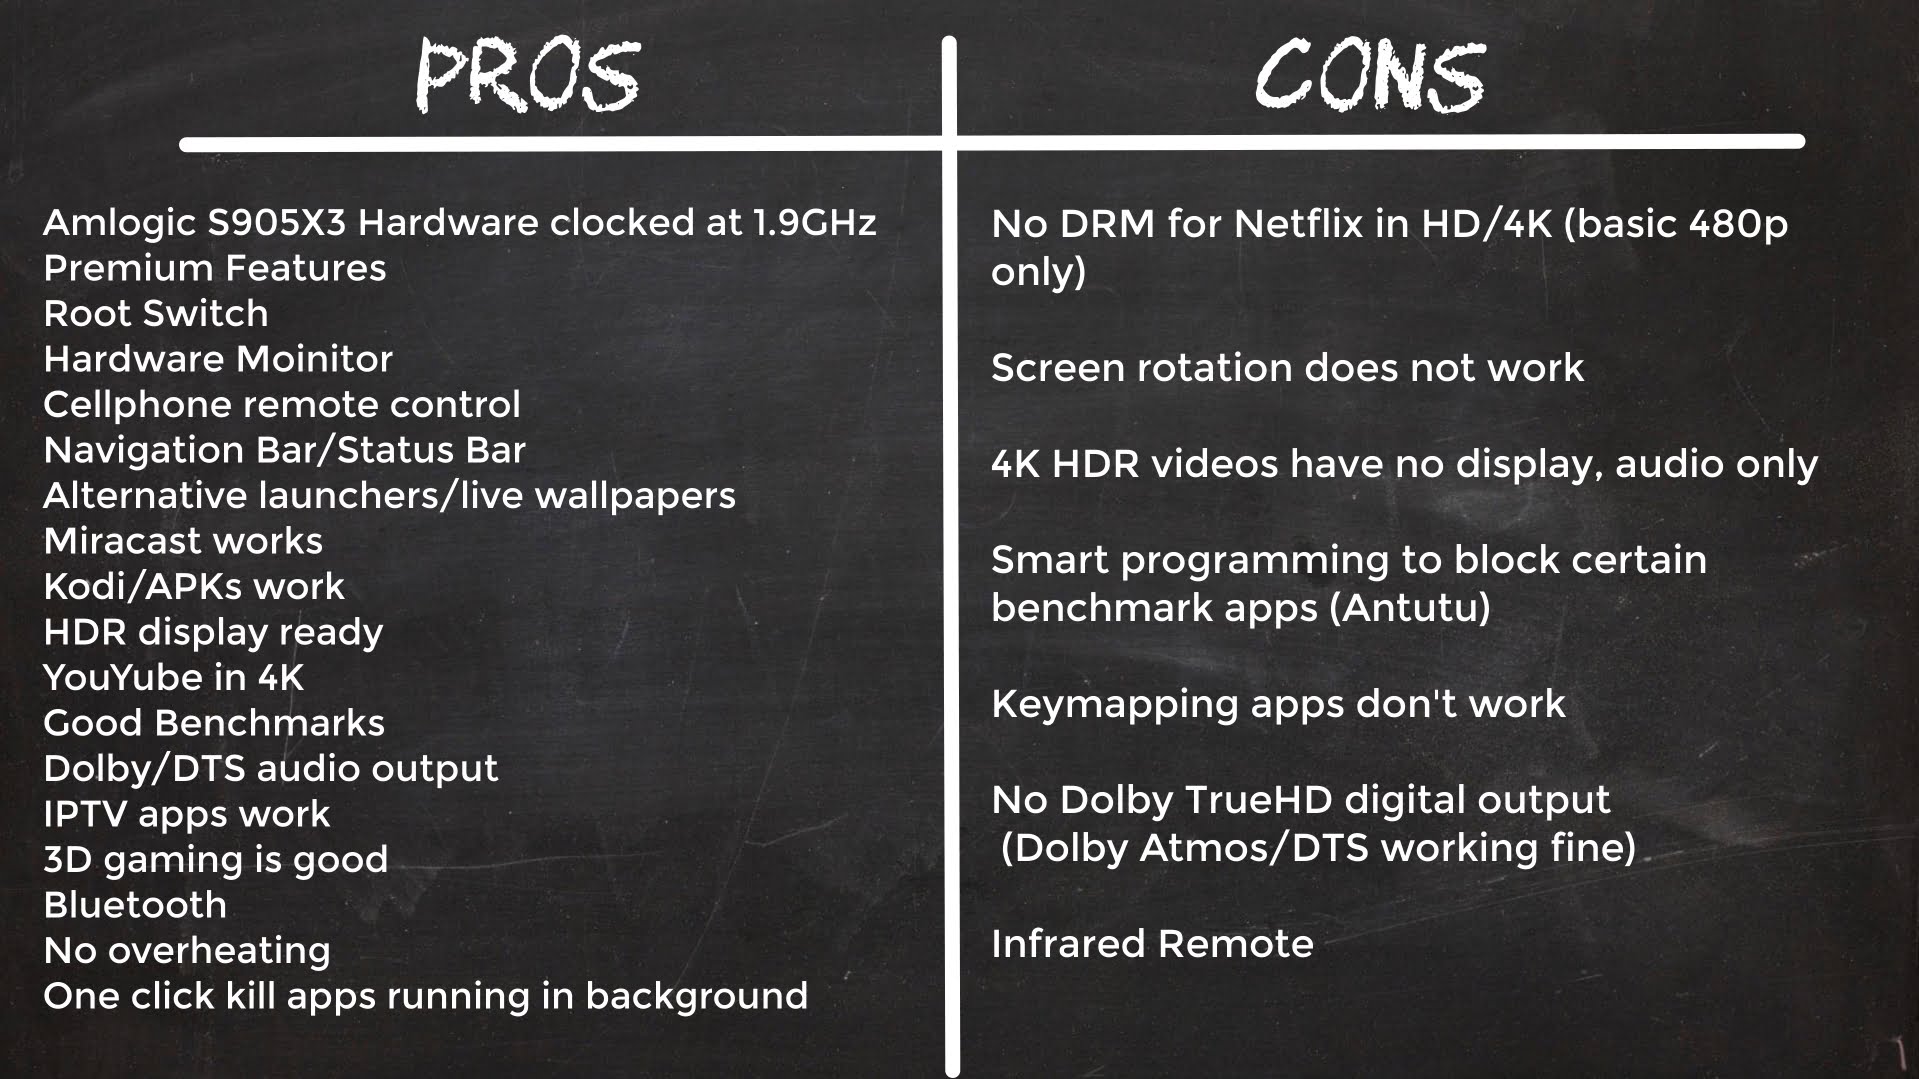 H9 X3 Pros and cons